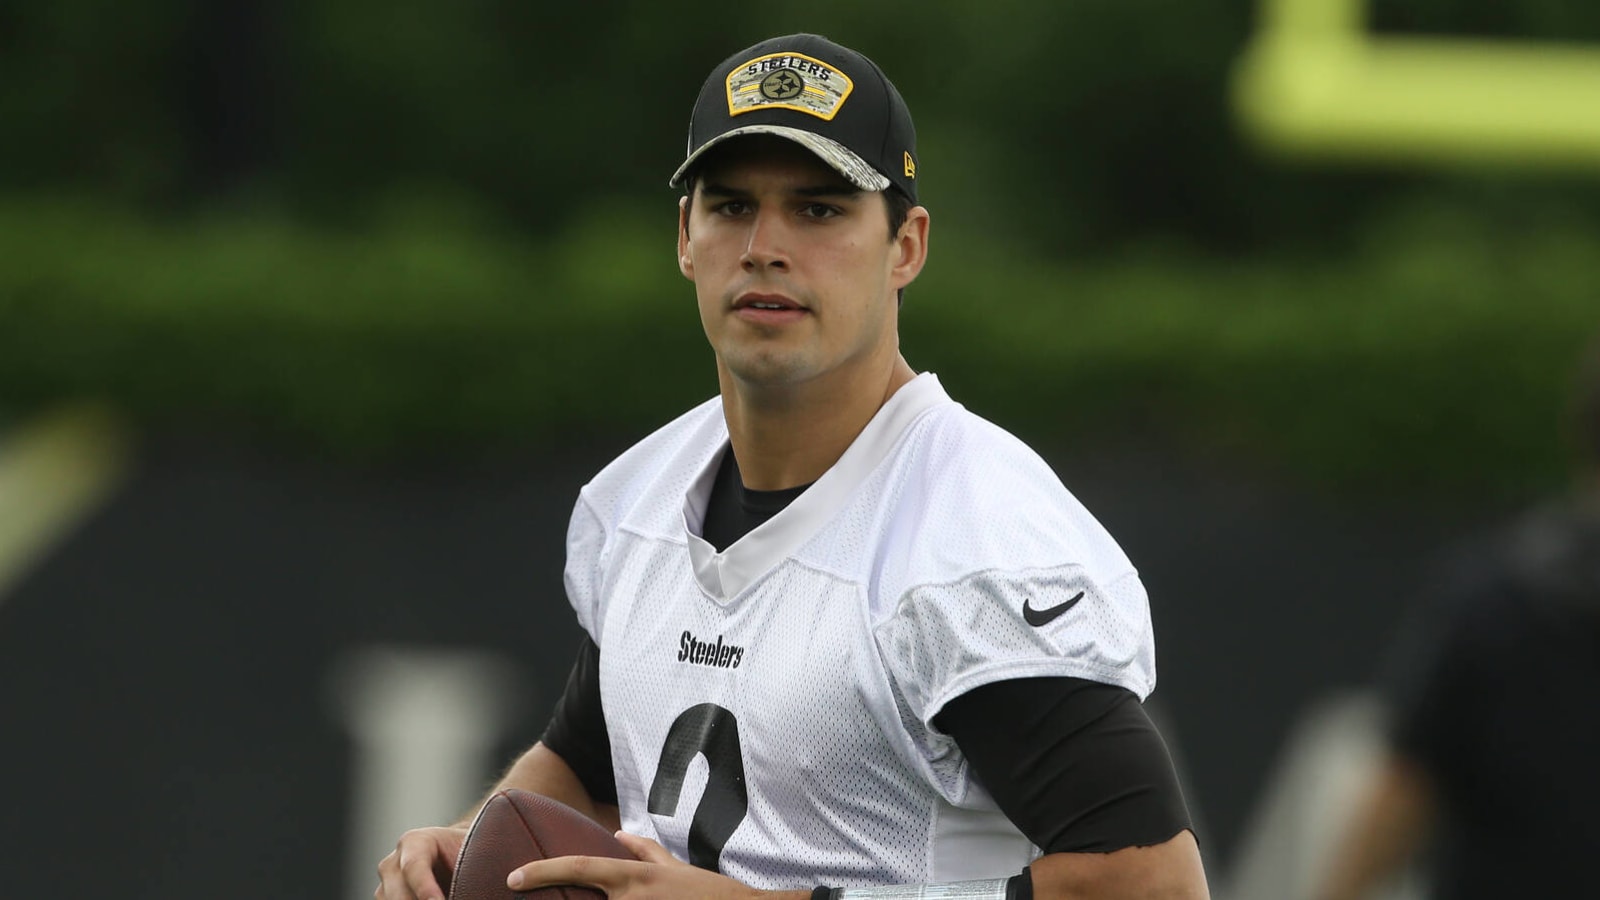 Insider suggests Steelers could look to trade Mason Rudolph